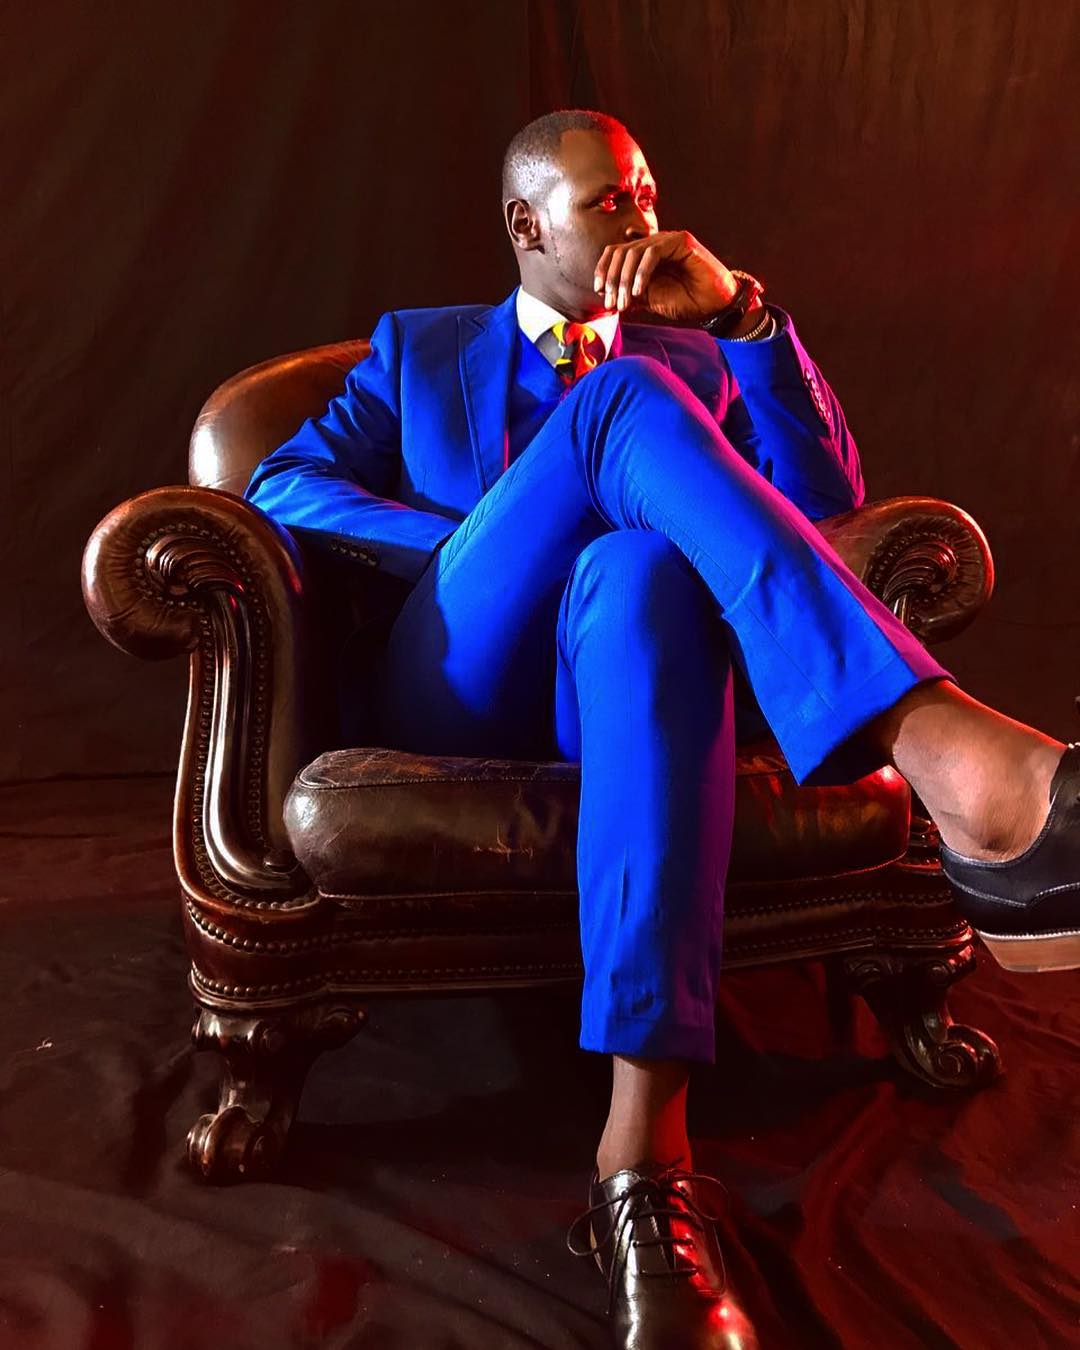 King Kaka finally explains why American rapper Cassidy is not on his music video